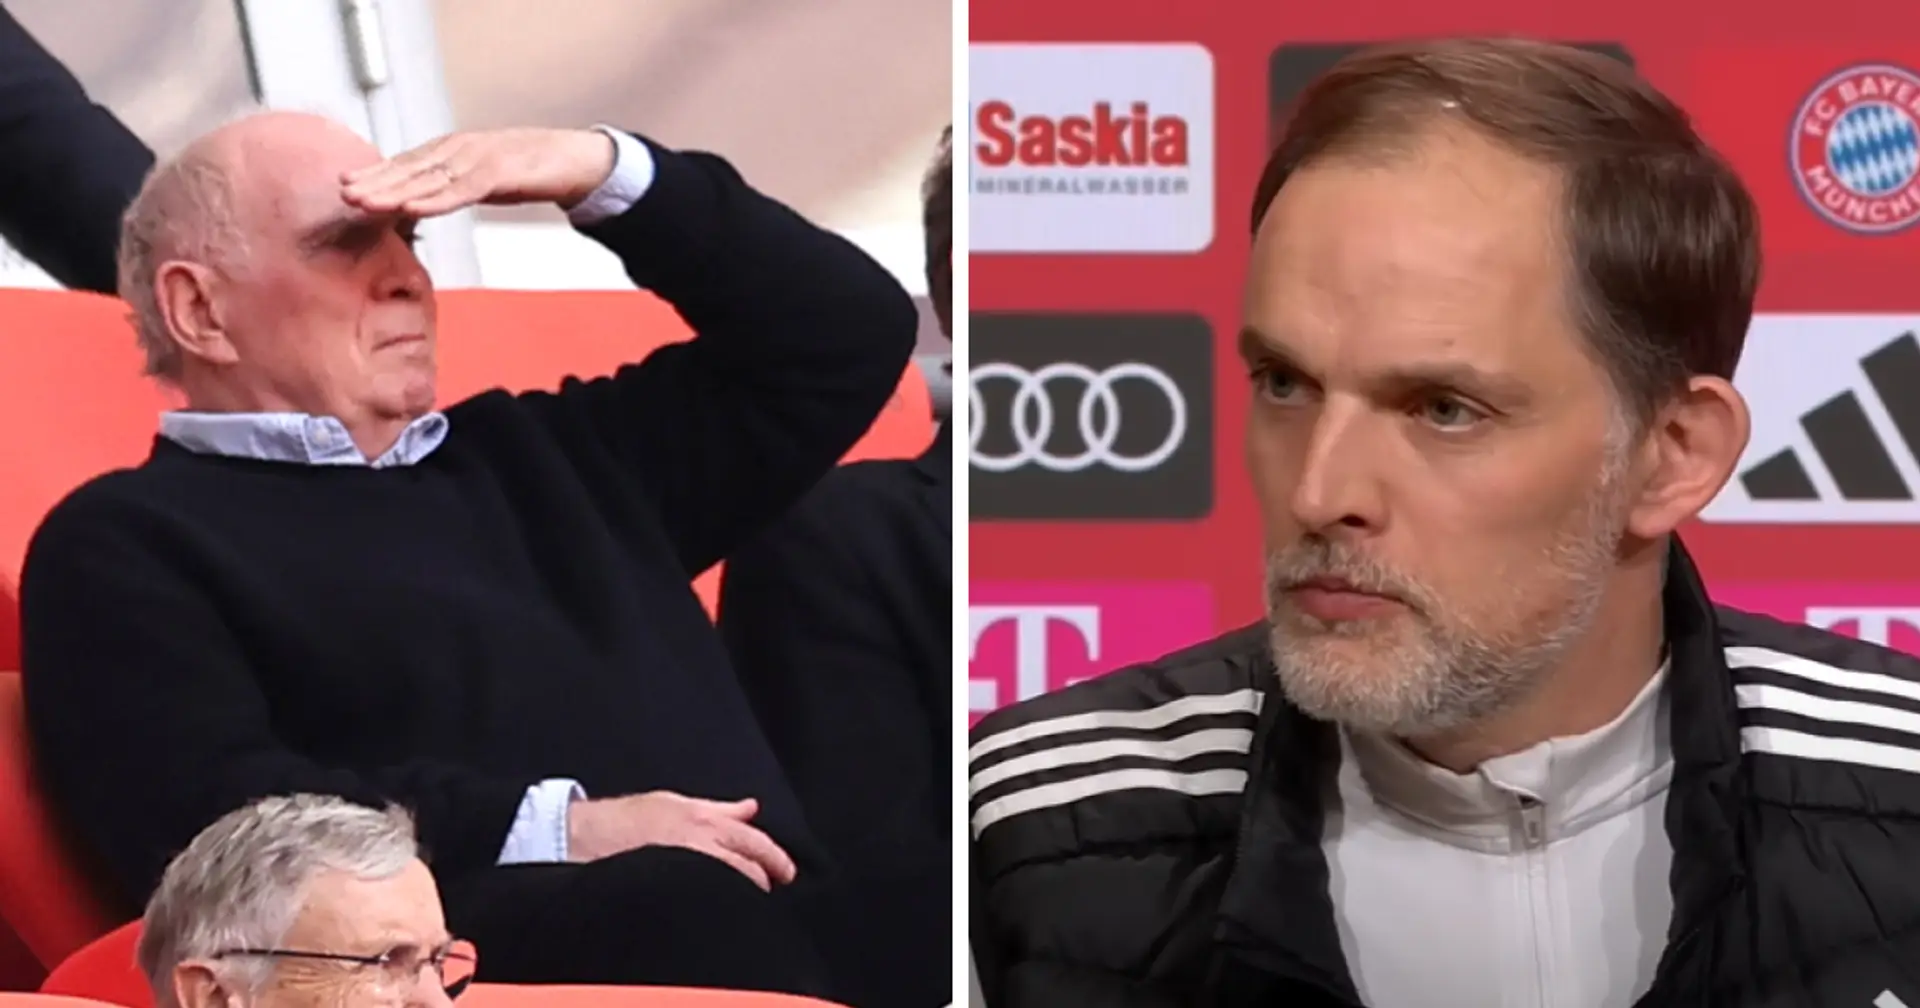 'It offends me deeply': Thomas Tuchel hits back at Uli Hoeness' claims